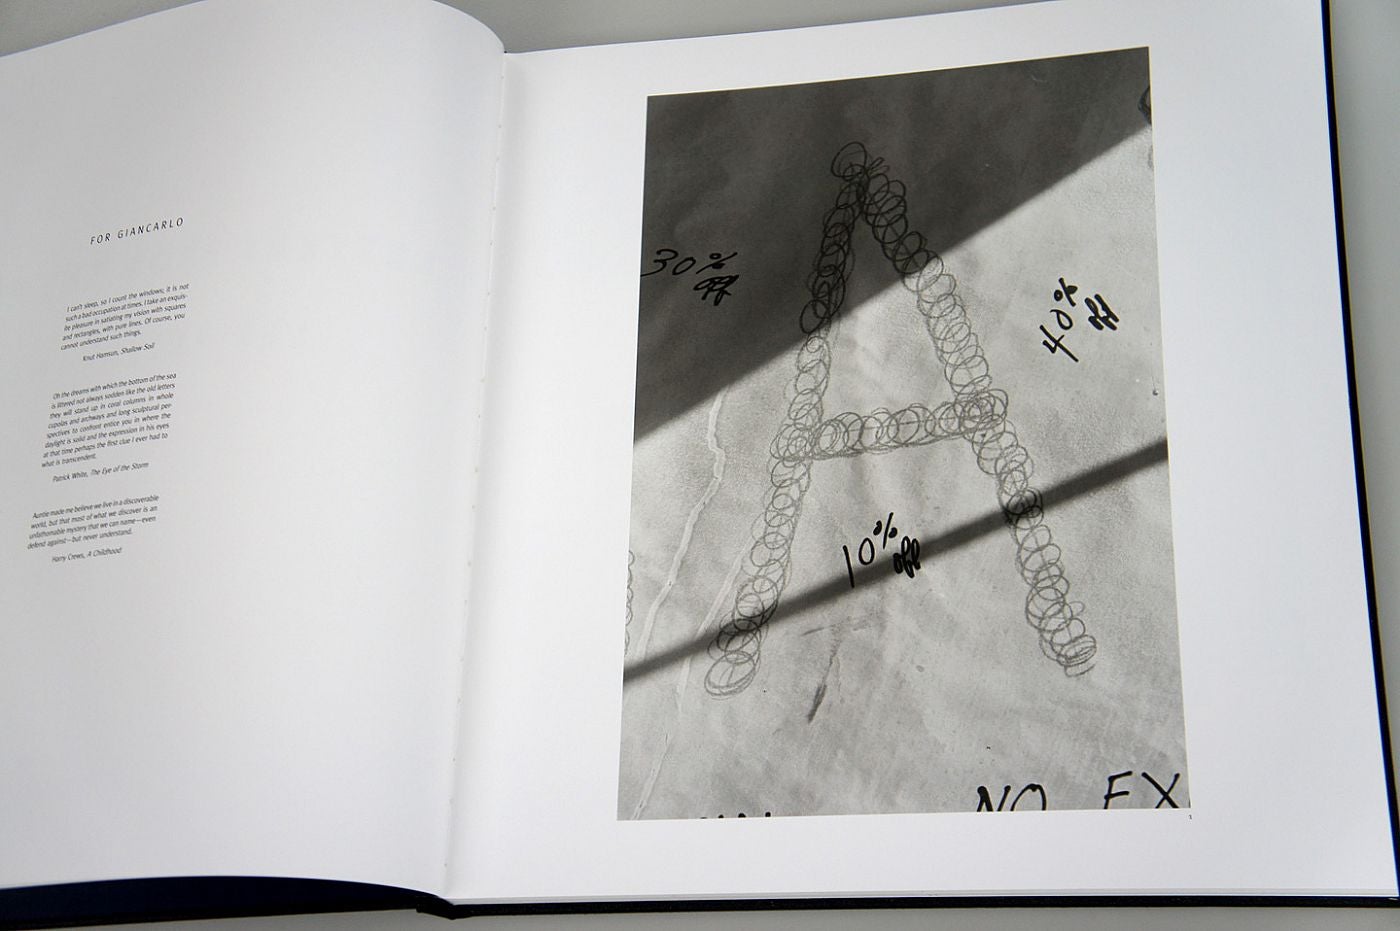 Lee Friedlander: Letters from the People (Special Limited Edition with One Vintage Gelatin Silver Print: "A")